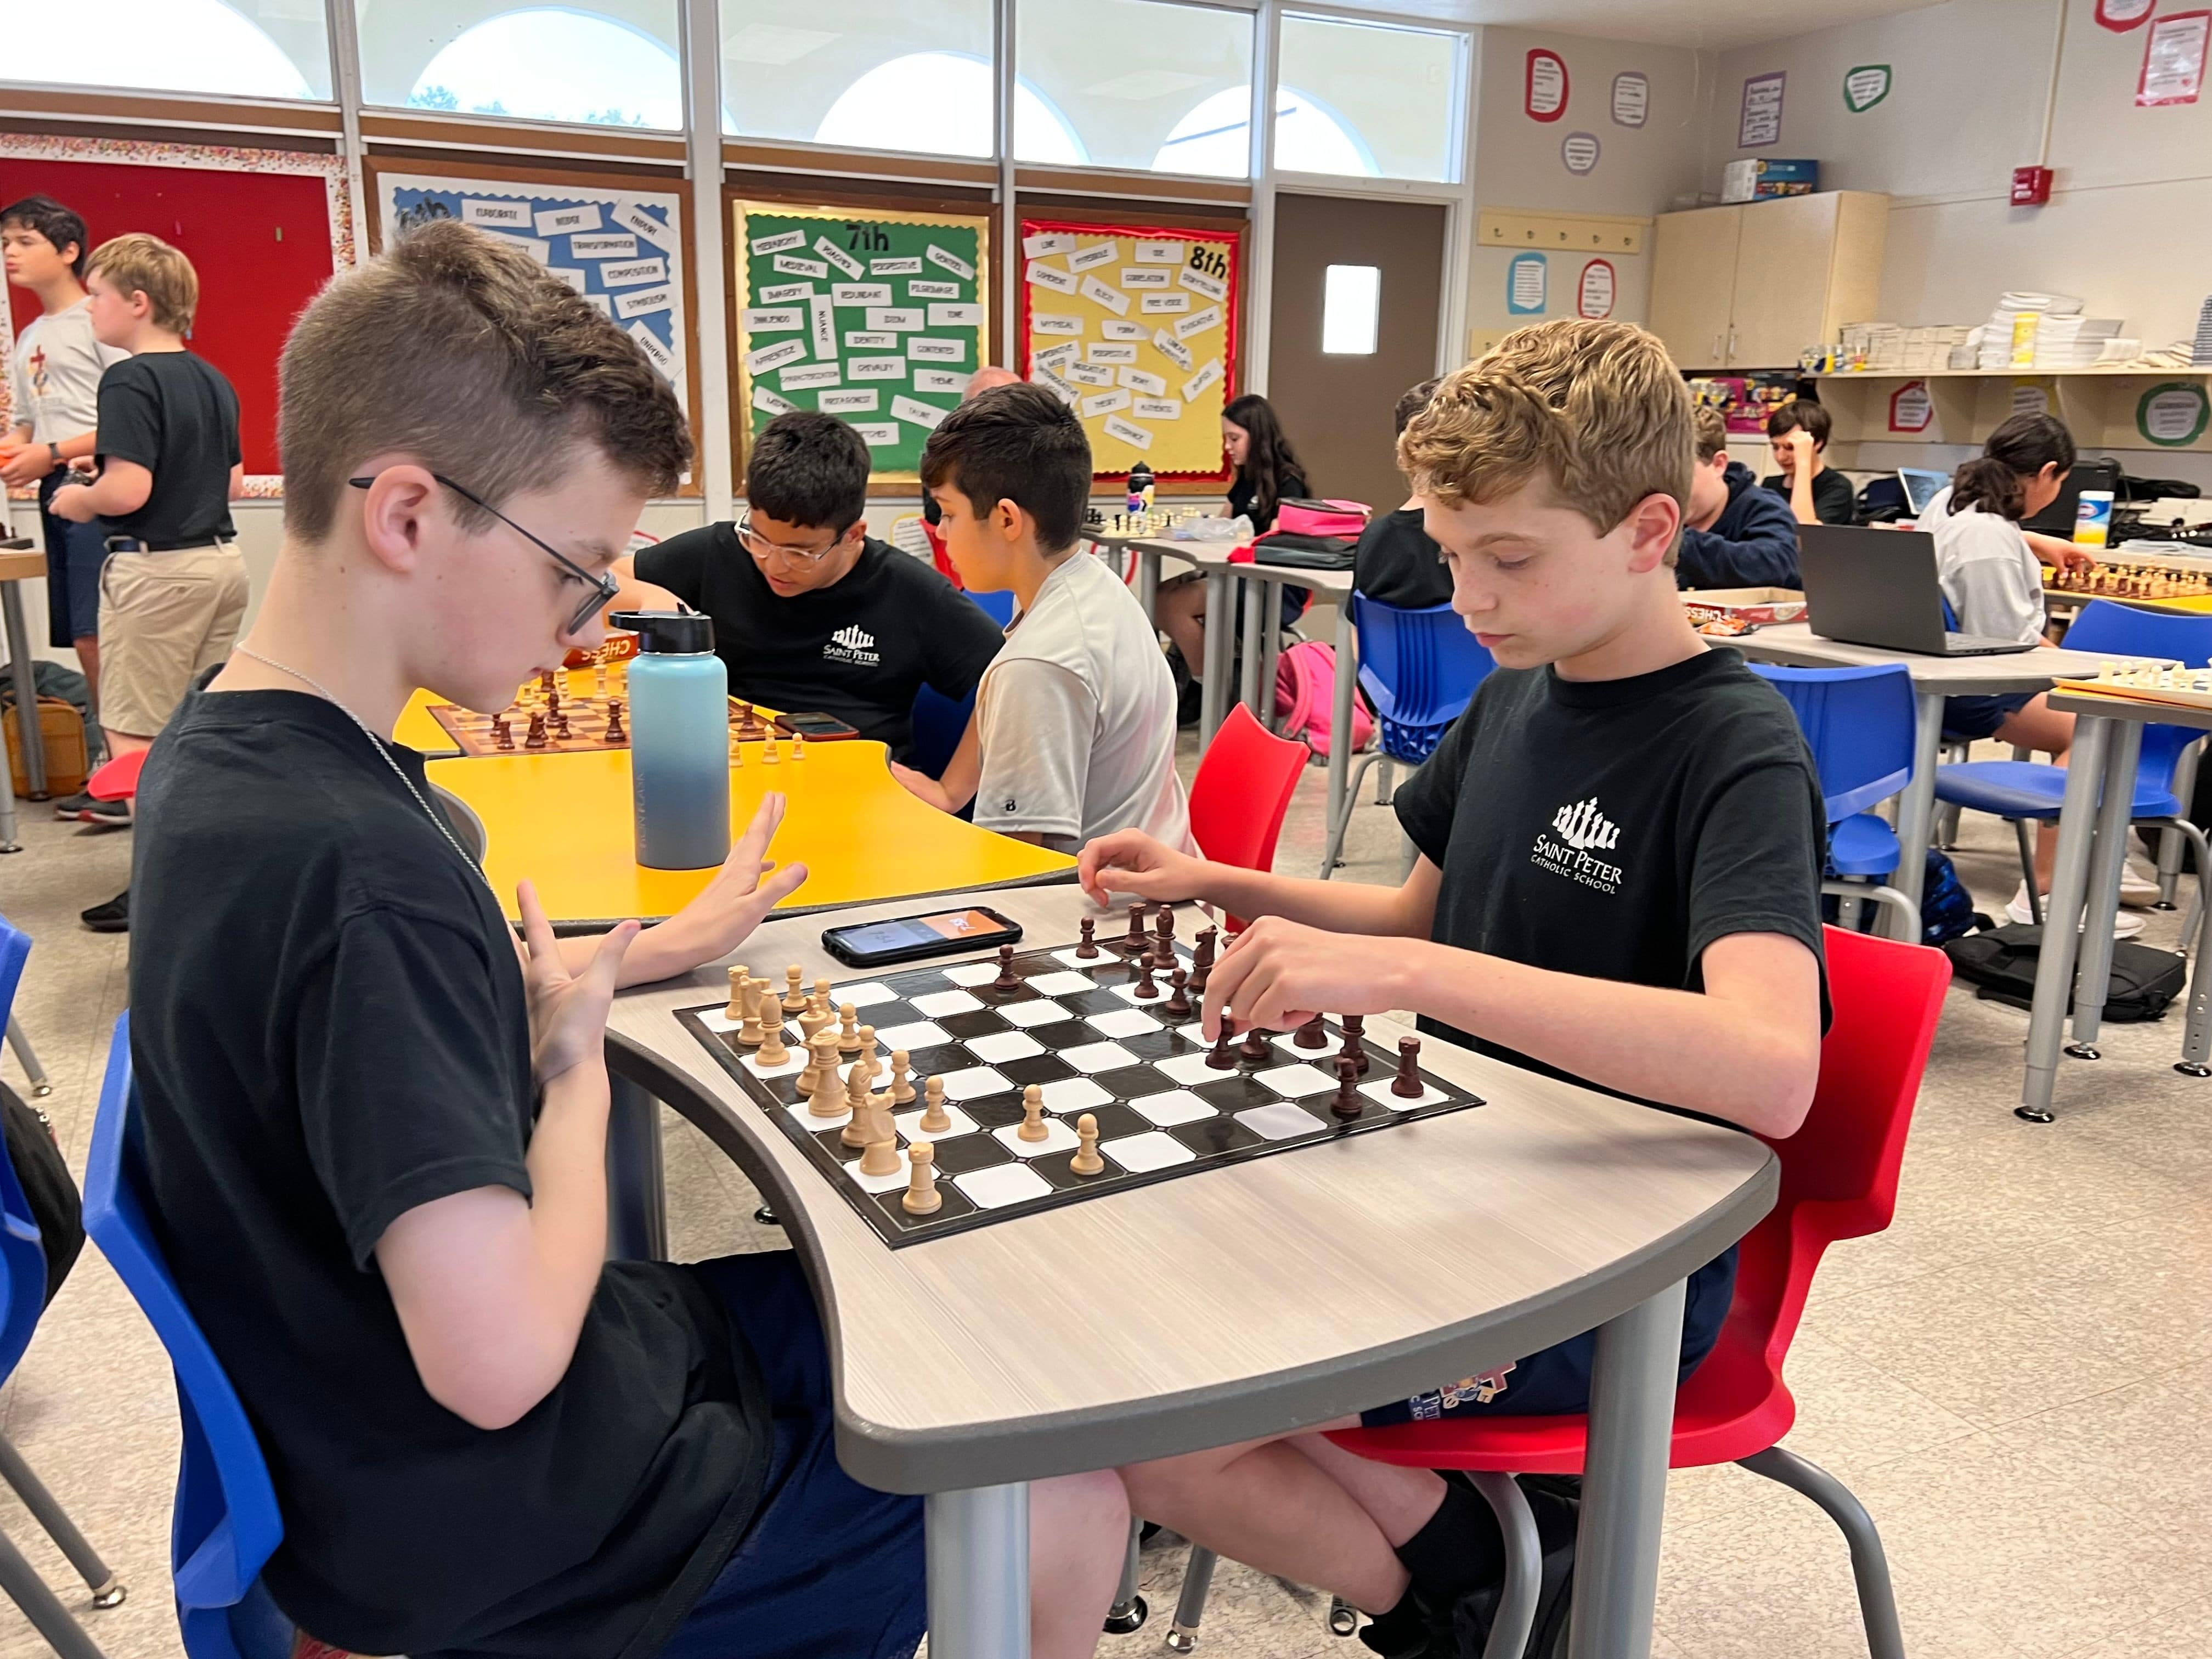 Students are learning the game of chess.